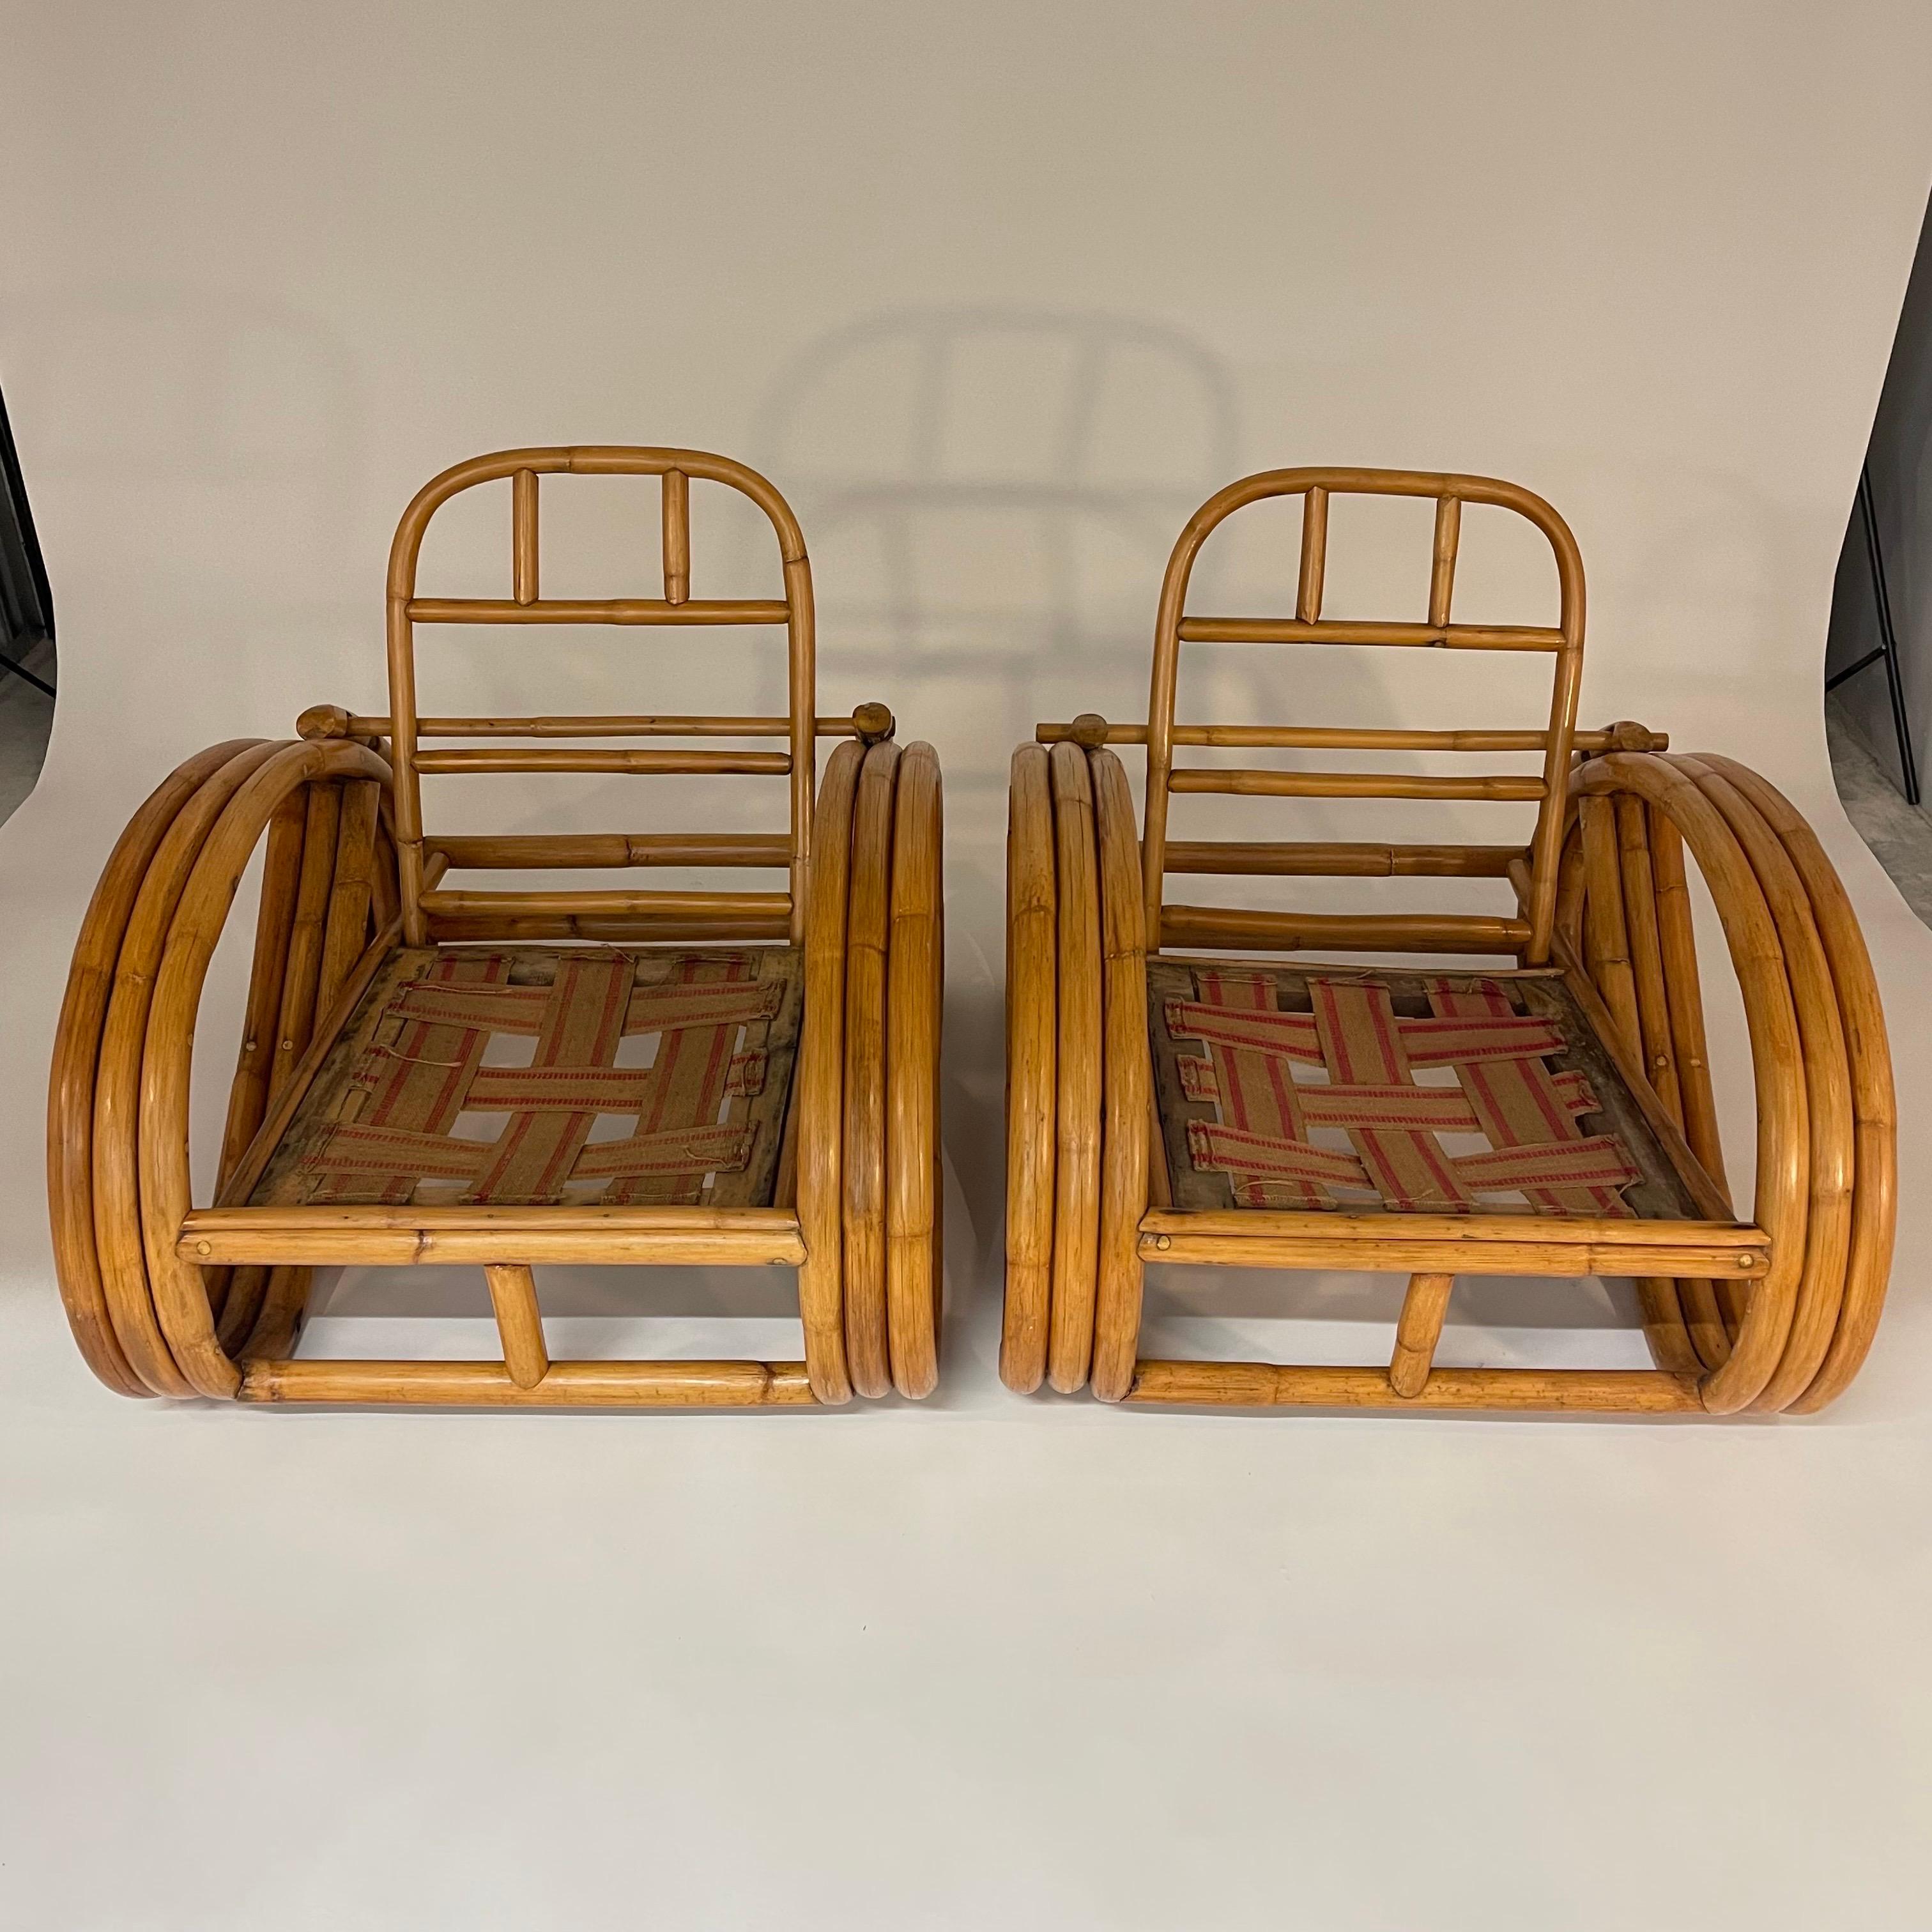 Art Deco Pair of Paul Frankl Style Pretzel Club or Lounge Chairs, USA, 1940s For Sale 4